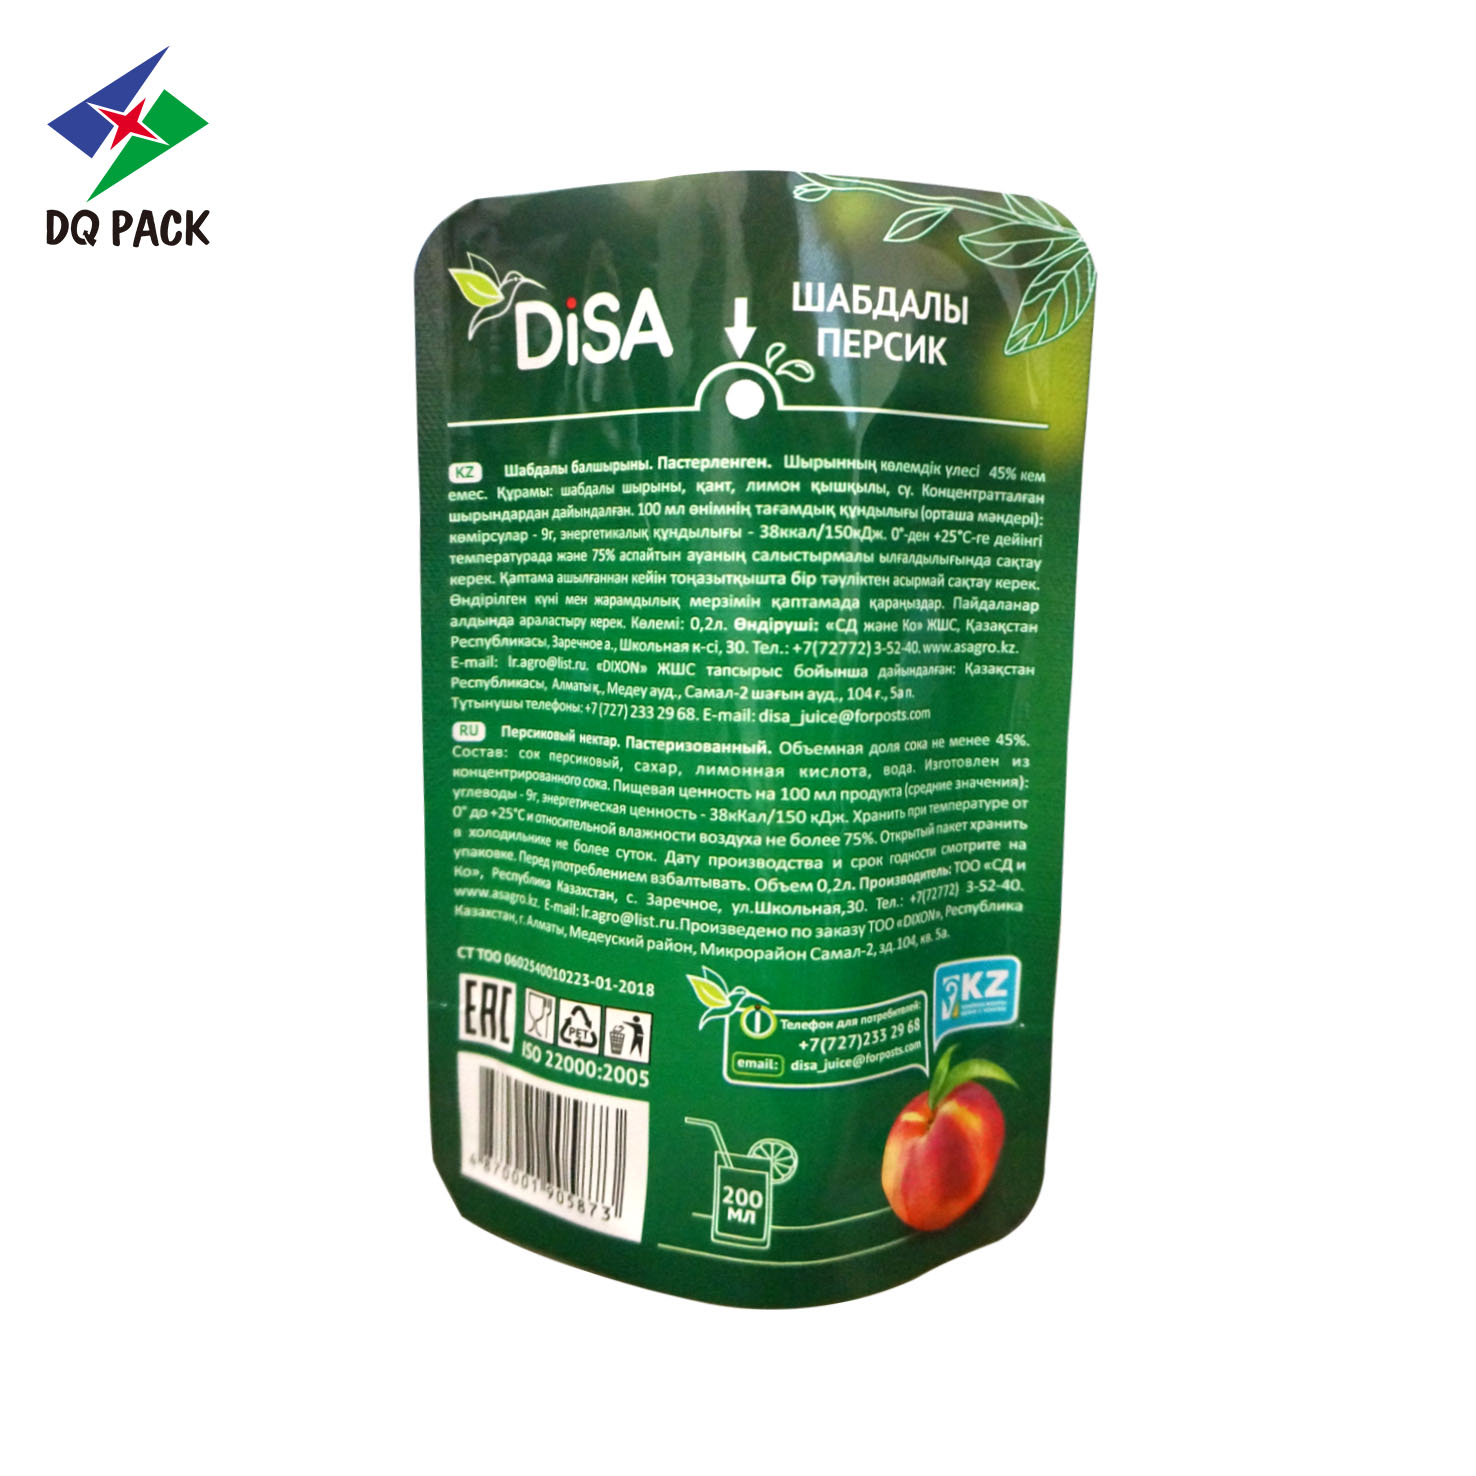 DQ PACK OEM Design Stand Up Plastic Packaging Bag 200ml Juice Heat Seal Doypack Liquid Glossy Surface Poly Bag